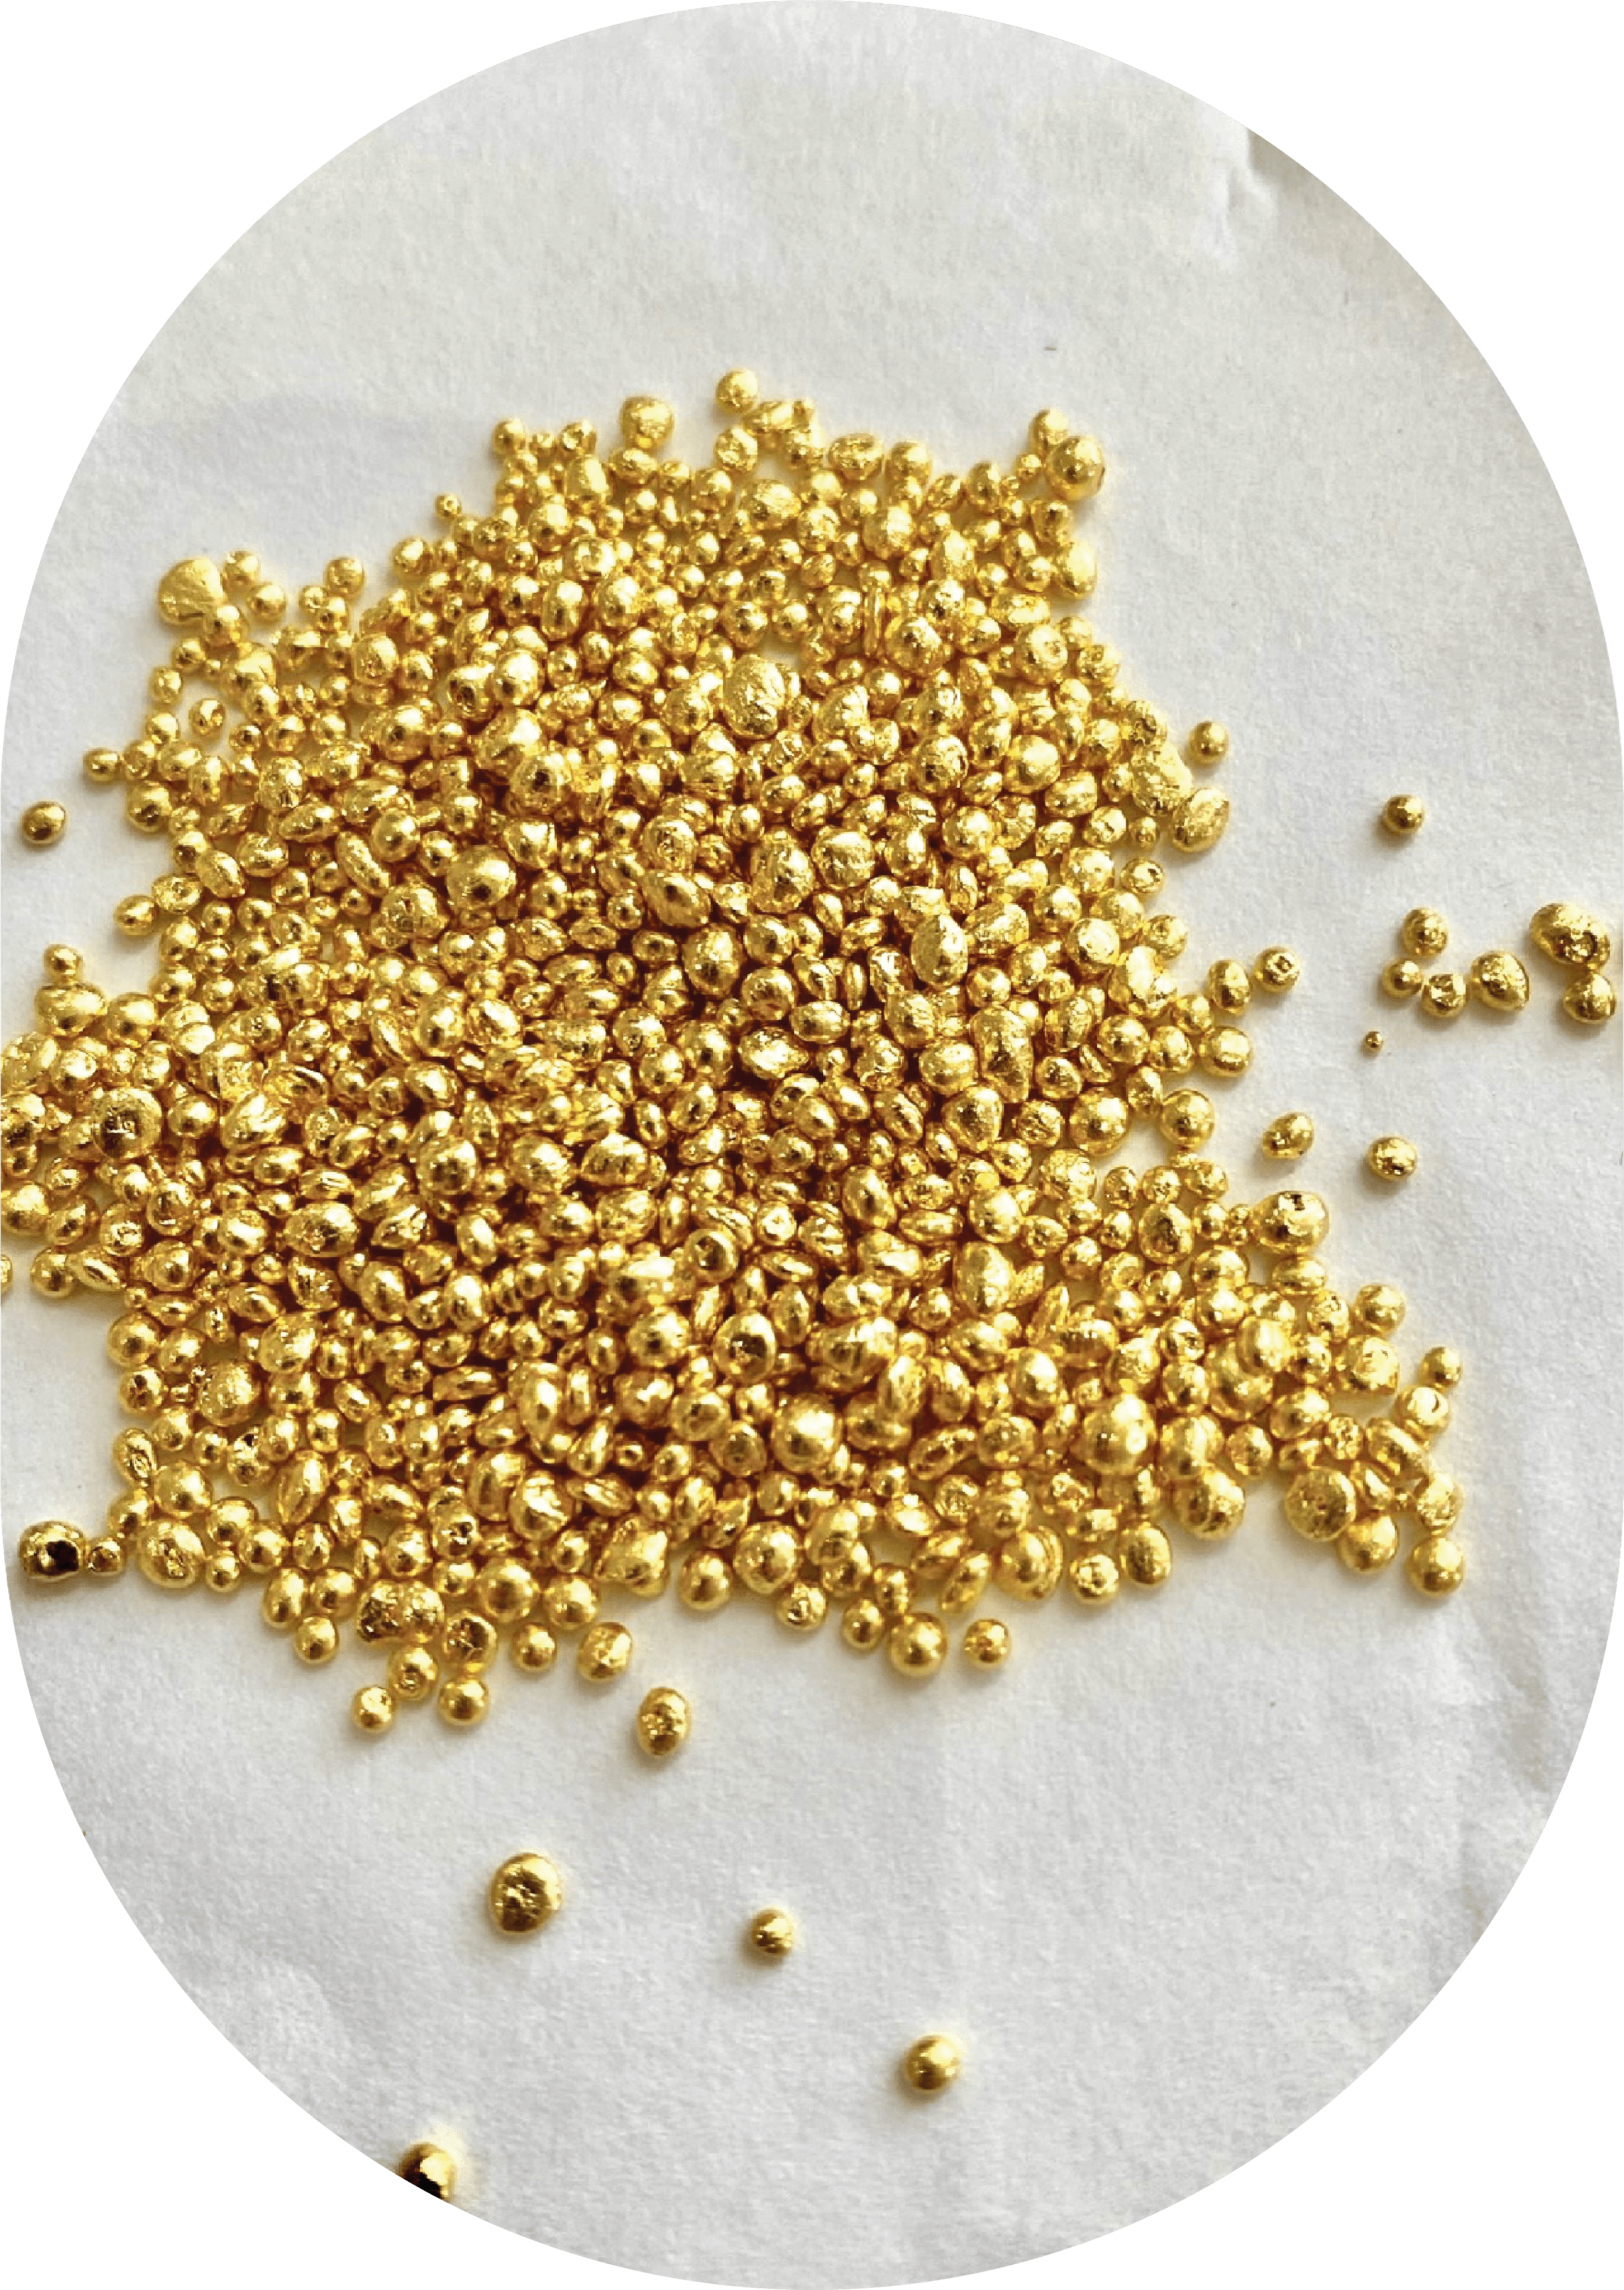 Image of Or & Elle's gold is sourced from heirloom jewelry and melted down to its original form, enabling the creation of new jewelry and the circularity of our supply chain. Shown here are 18K Gold beads, which are melted down to create new jewelry.